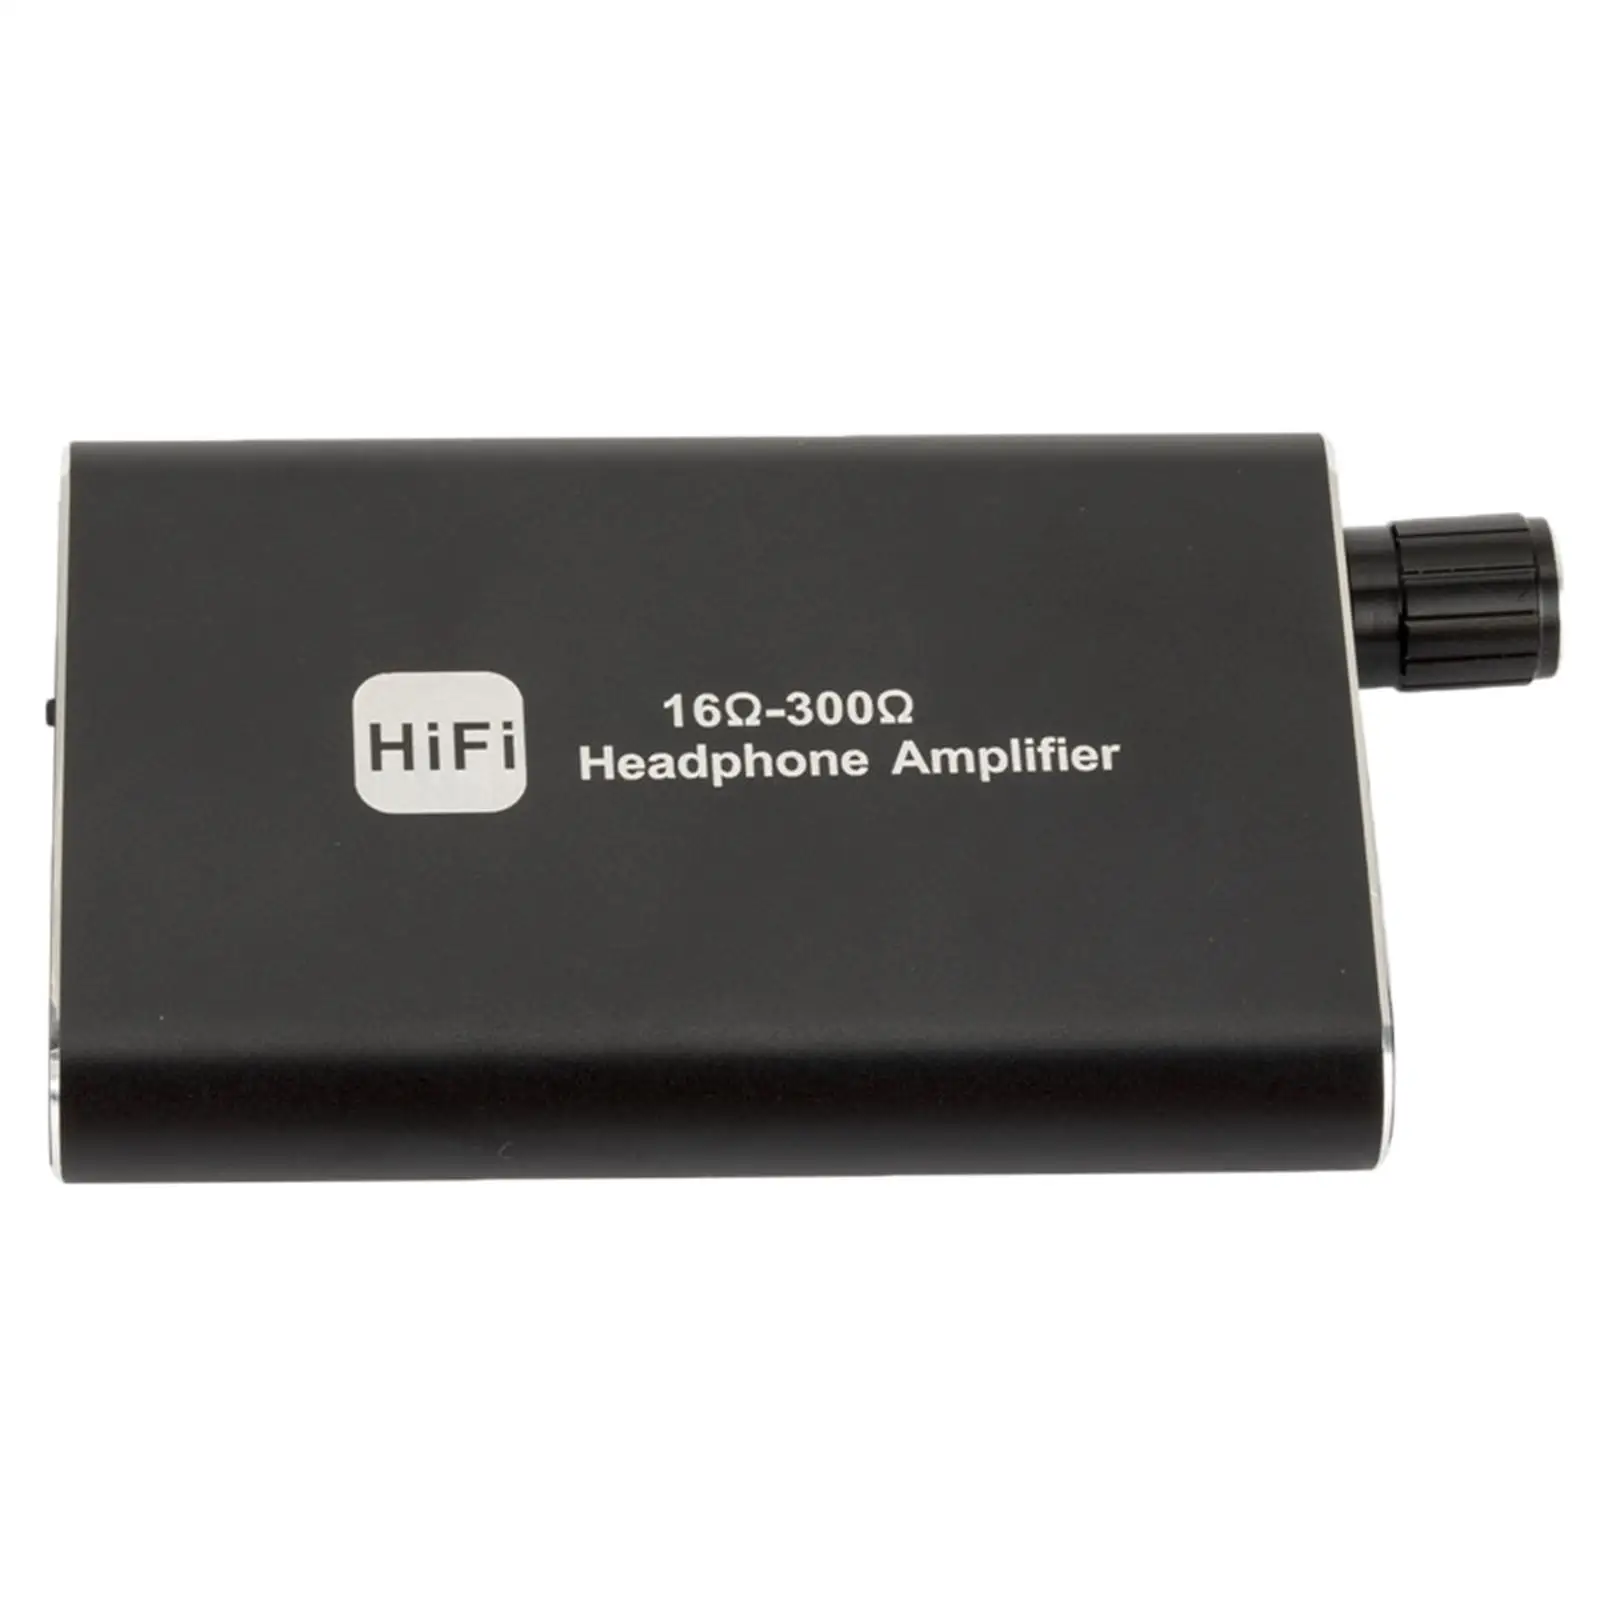 3.5mm Headphone Amplifier, Portable HiFi Headset Amplifier for MP3 MP4 Computers